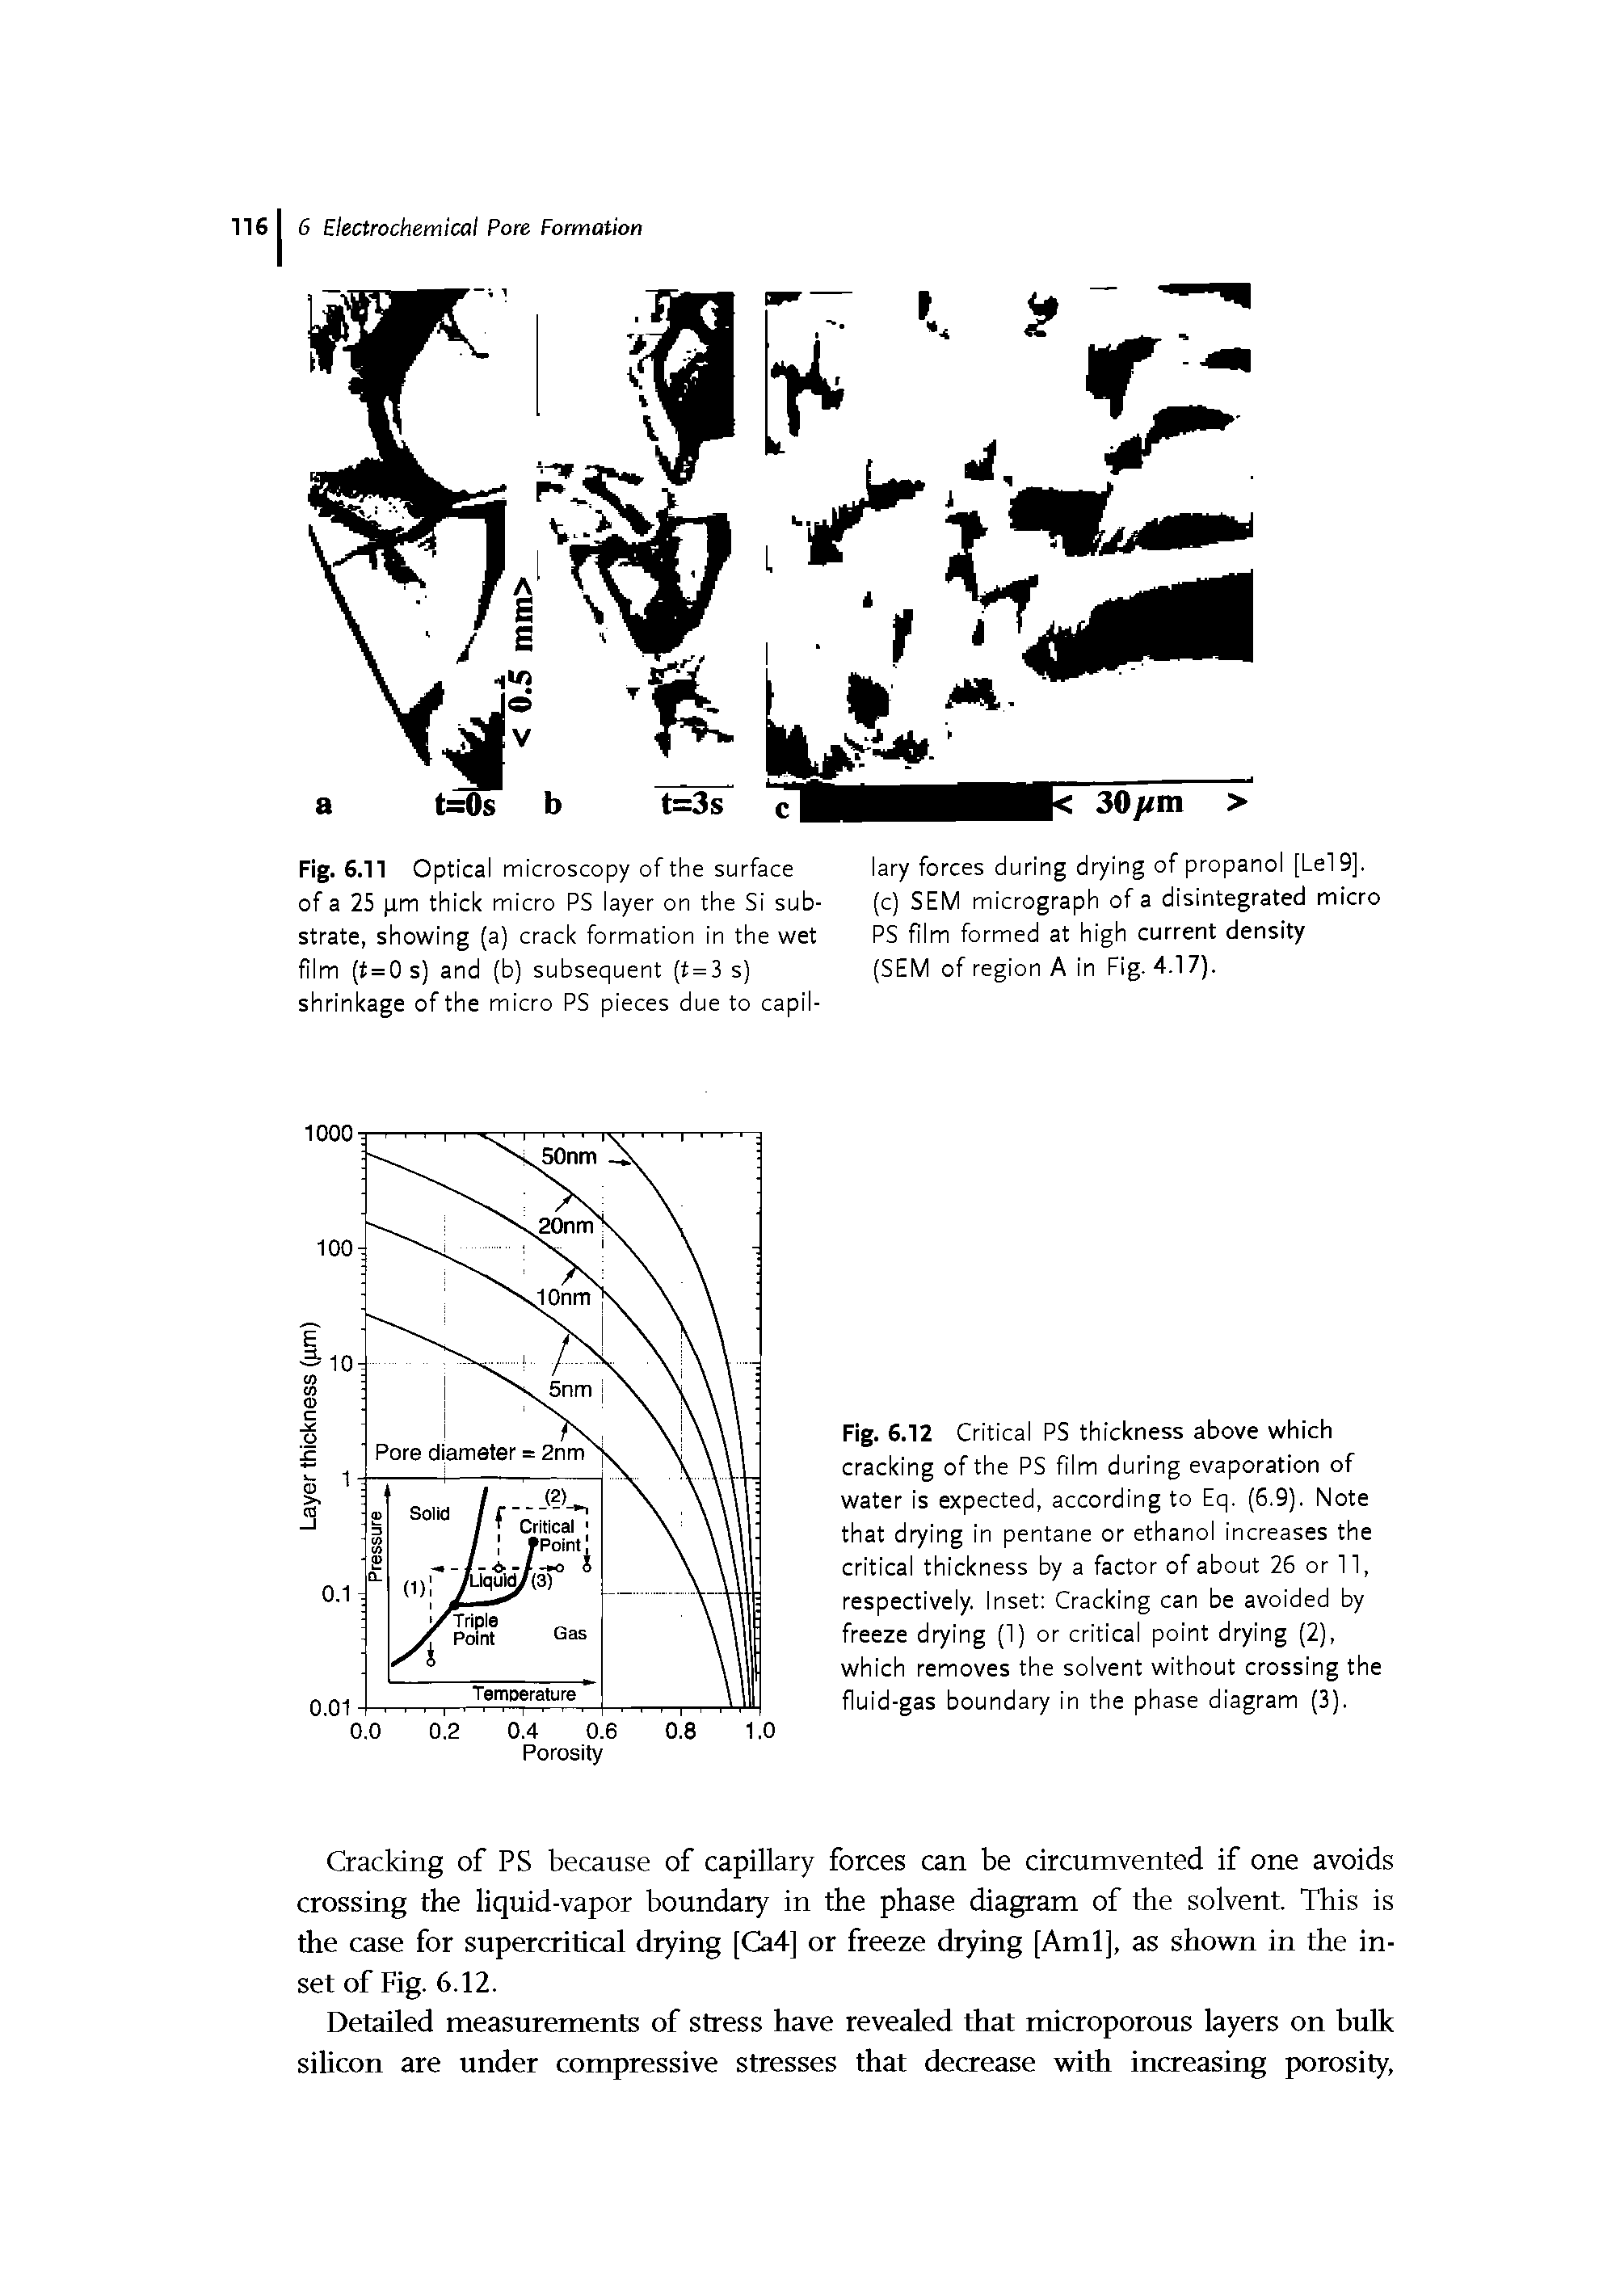 Fig. 6.12 Critical PS thickness above which cracking of the PS film during evaporation of water is expected, according to Eq. (6.9). Note that drying in pentane or ethanol increases the critical thickness by a factor of about 26 or 11, respectively. Inset Cracking can be avoided by freeze drying (1) or critical point drying (2), which removes the solvent without crossing the fluid-gas boundary in the phase diagram (3).